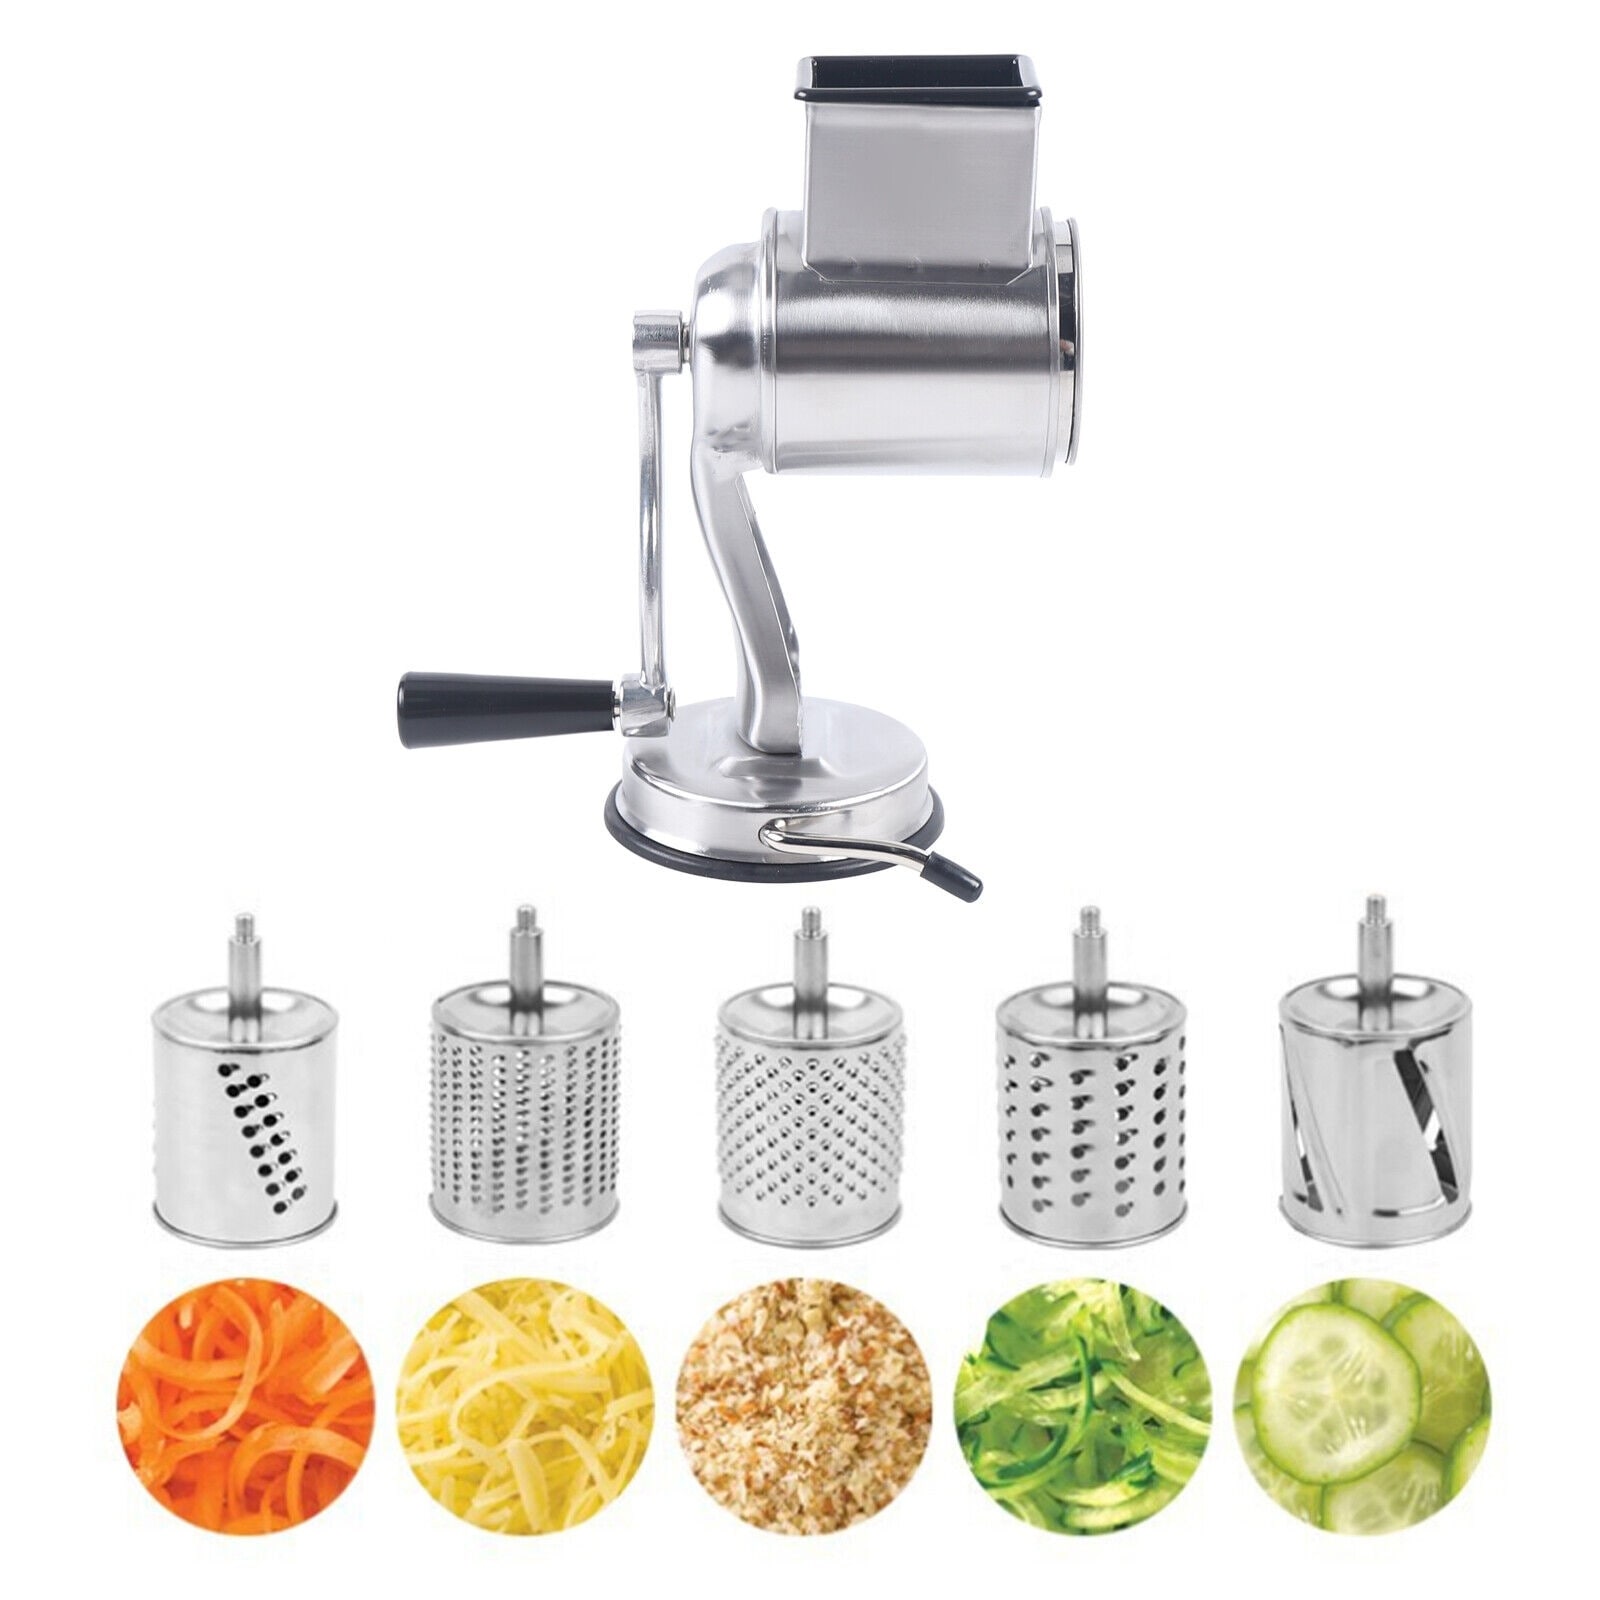 https://ak1.ostkcdn.com/images/products/is/images/direct/828396b3ab2e266438f7ce03340774cf25b641bb/Rotary-Cheese-Grater-Hand-Drum-Slicer-Stainless-Steel.jpg